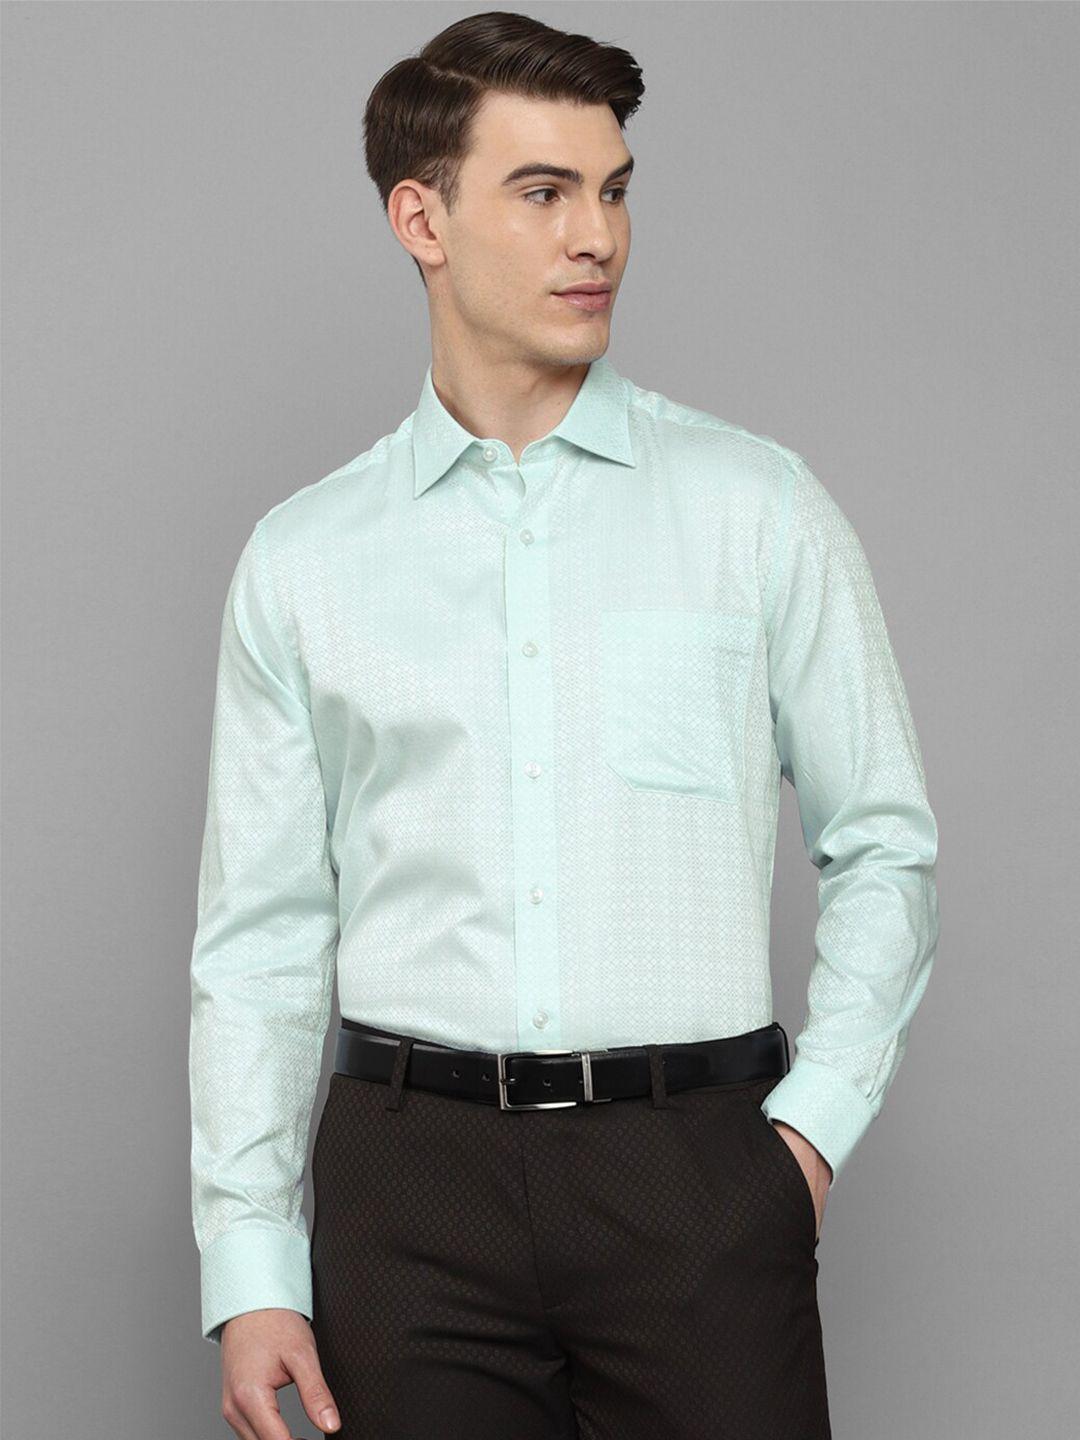 louis-philippe-men-turquoise-blue-textured-formal-shirt